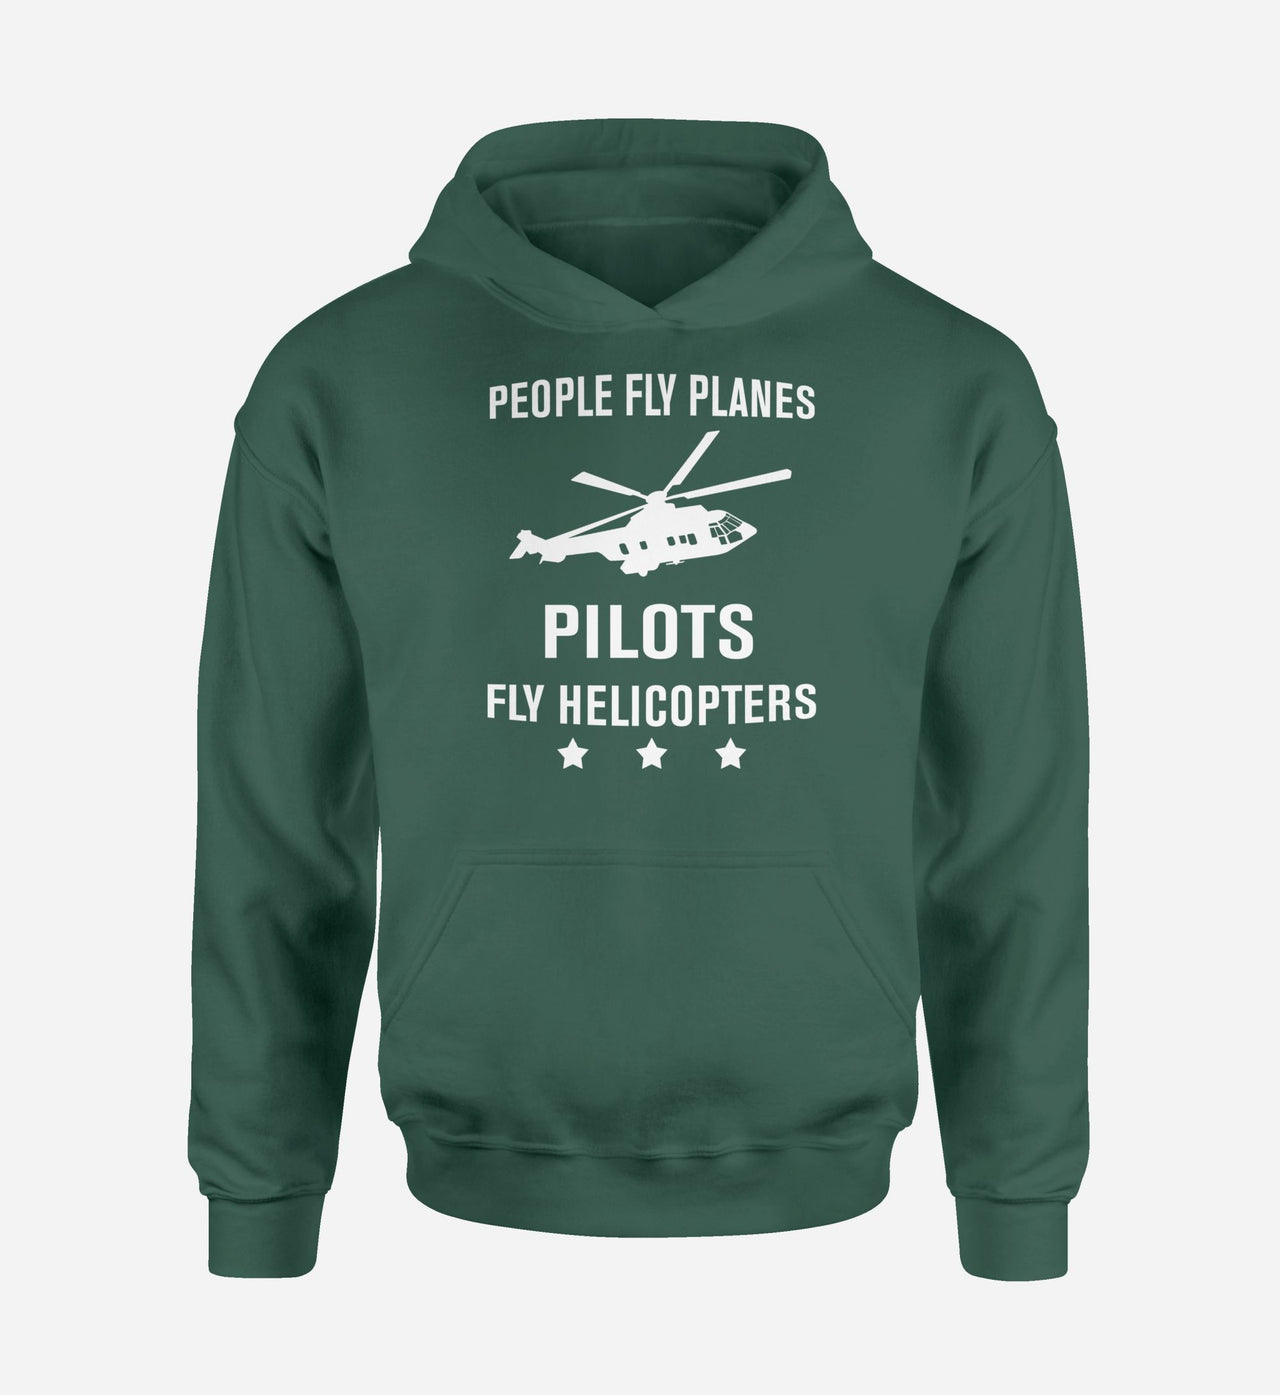 People Fly Planes Pilots Fly Helicopters Designed Hoodies